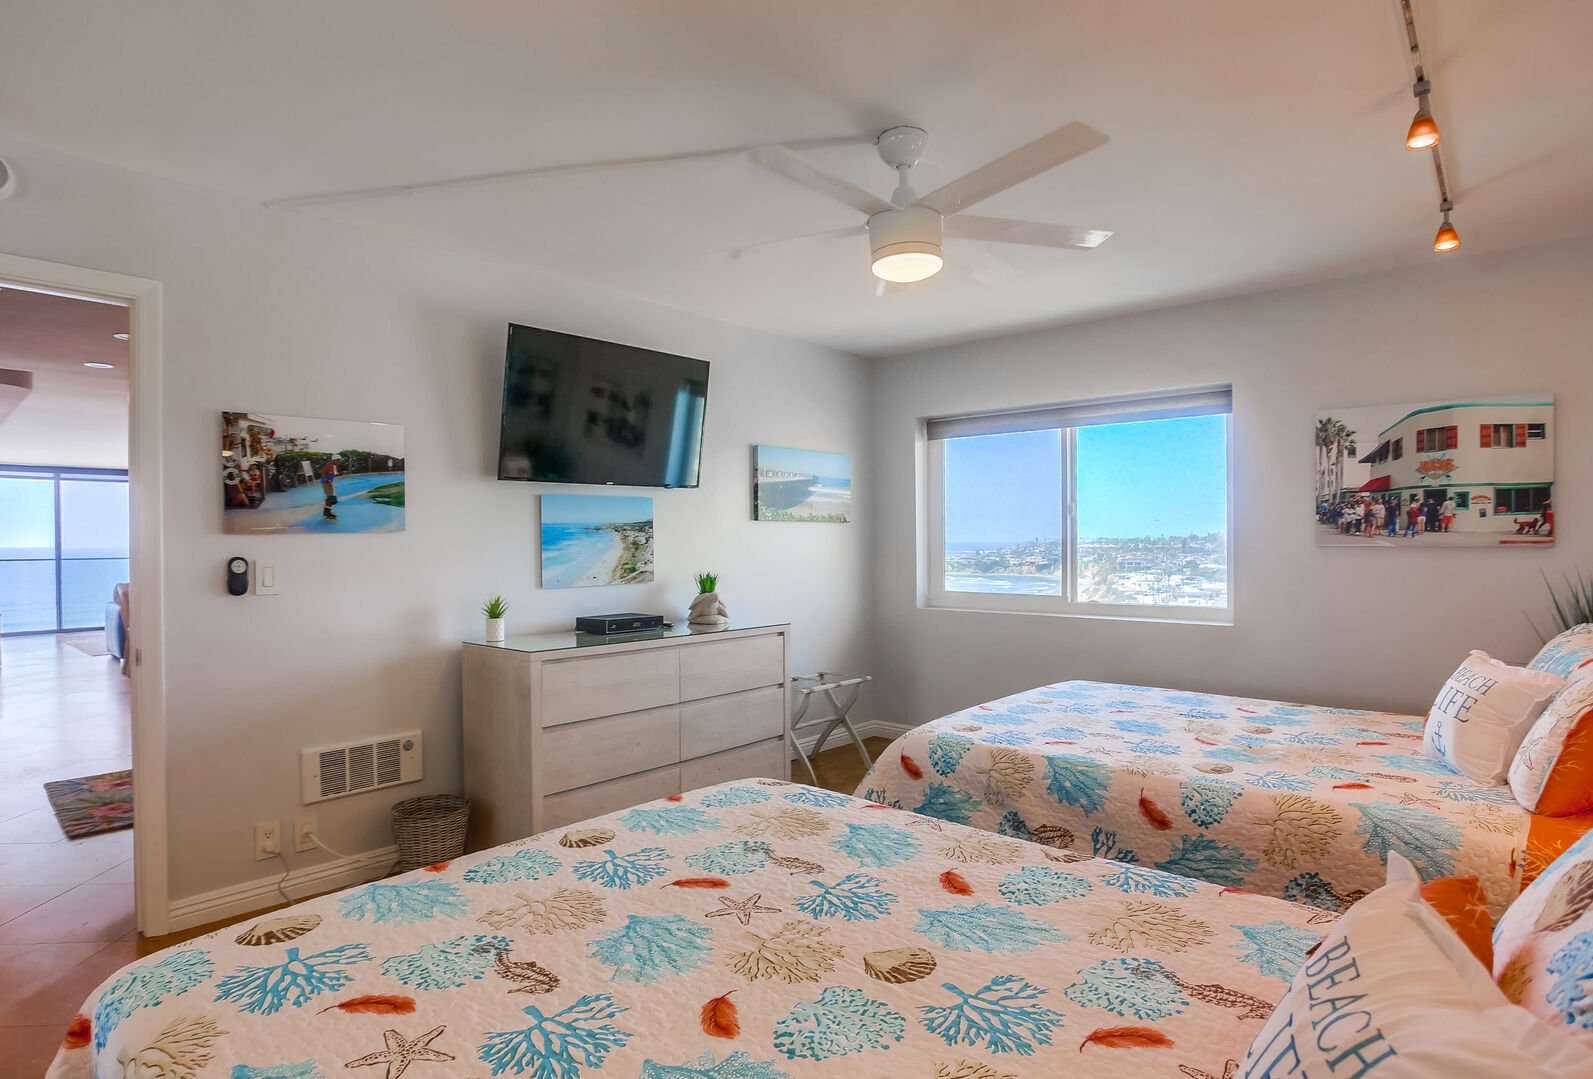 Guest bedroom with 2 queen beds, ceiling fan, closet and dresser storage, full bathroom separate just outside the bedroom, and smart TV with dvr and Cable. Corner beach and ocean views!